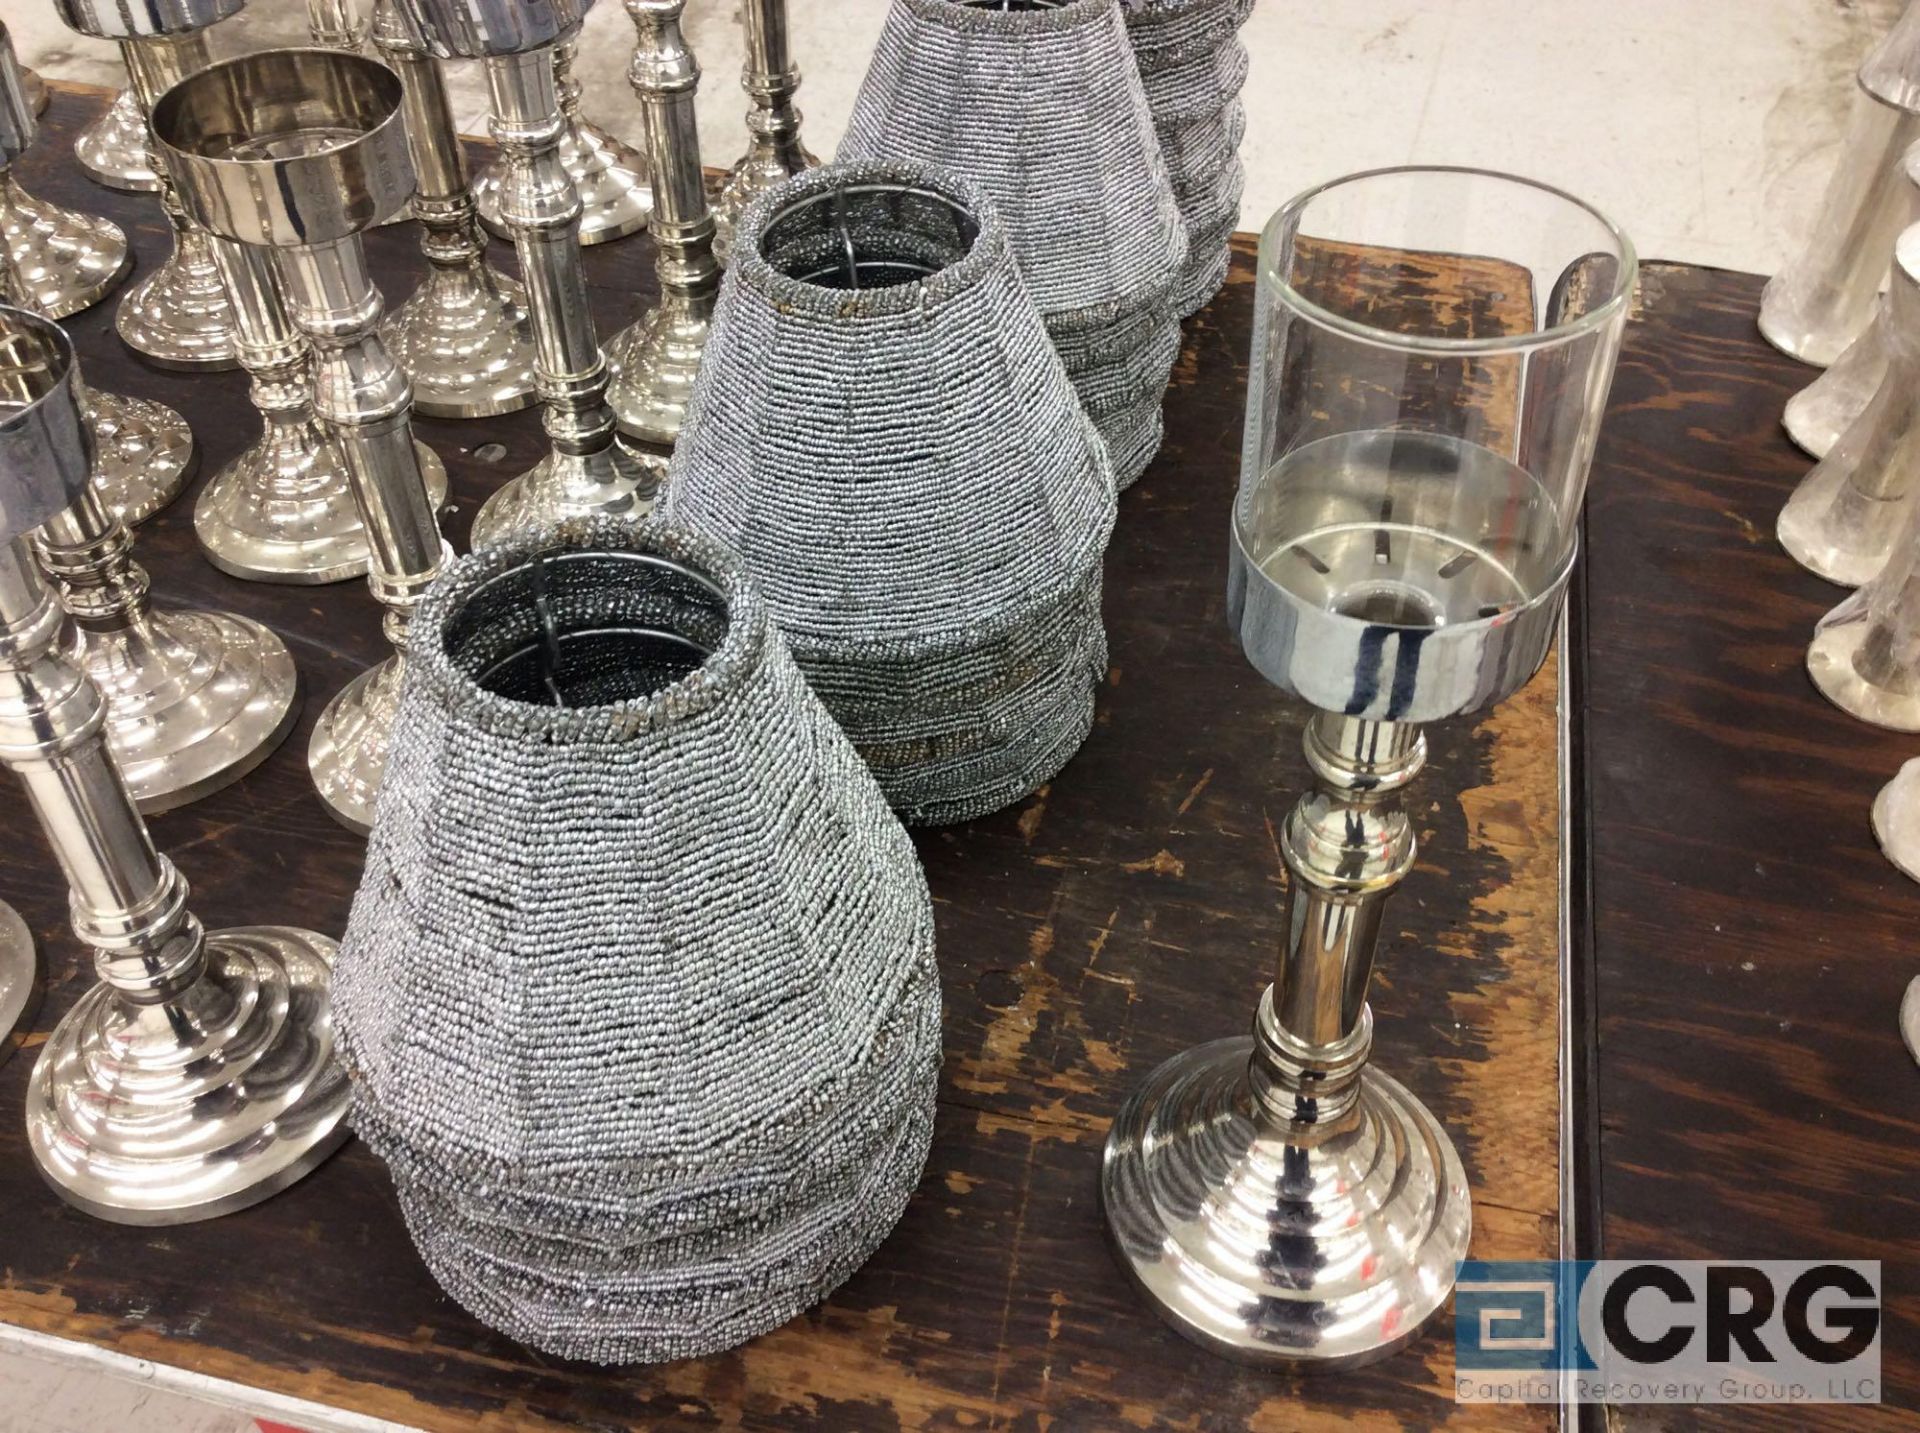 Lot includes (26) candle holders, (26) metal shades, and (6) glass globes. - Image 2 of 3